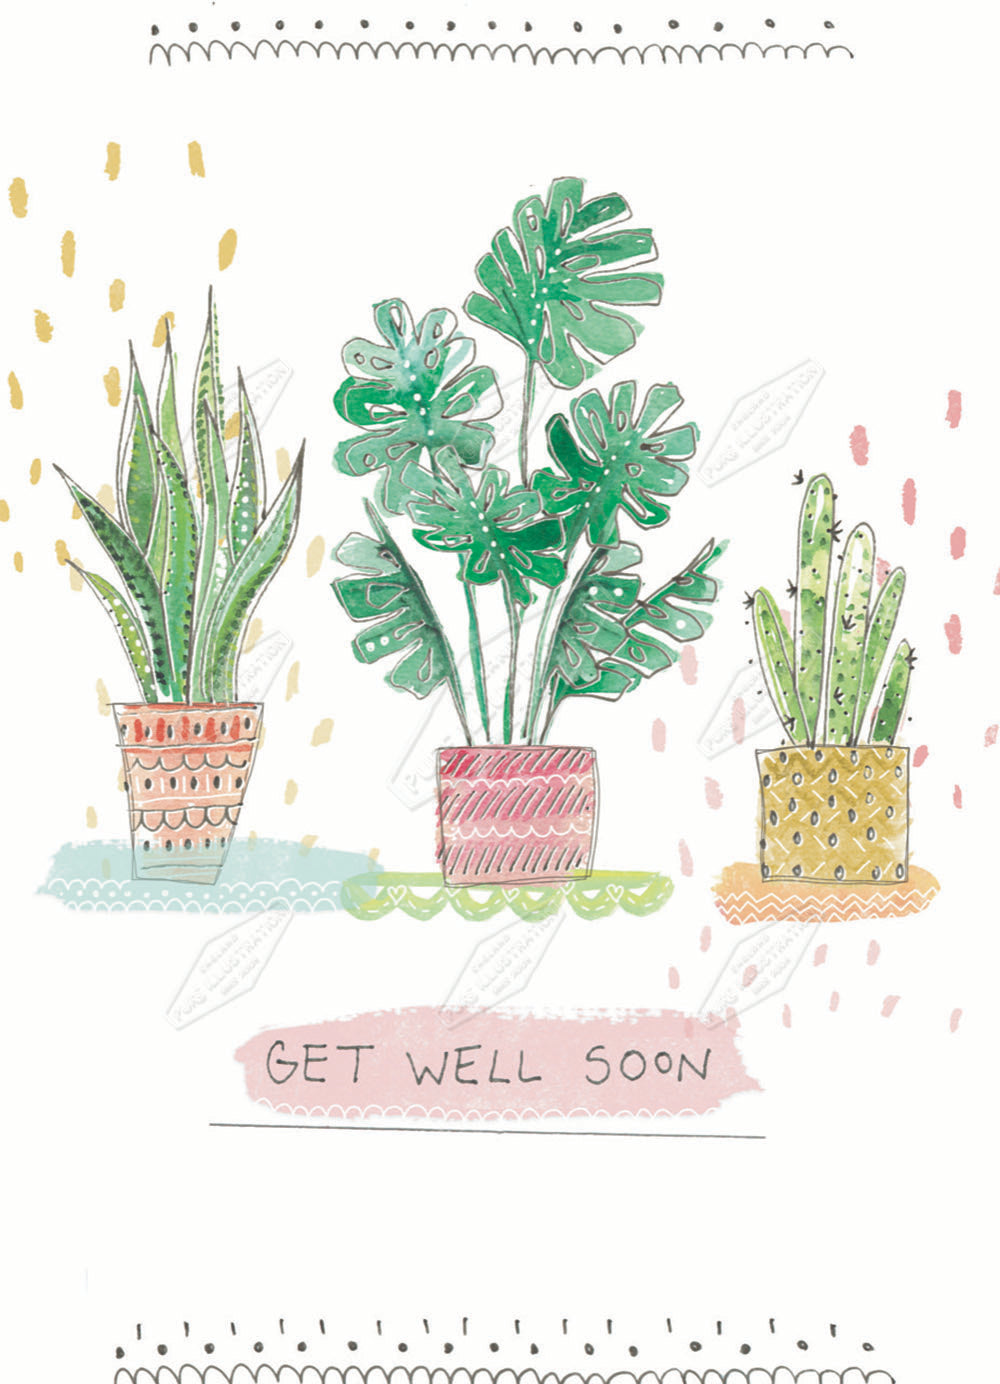 00032247KSP- Kerry Spurling is represented by Pure Art Licensing Agency - Get Well Greeting Card Design